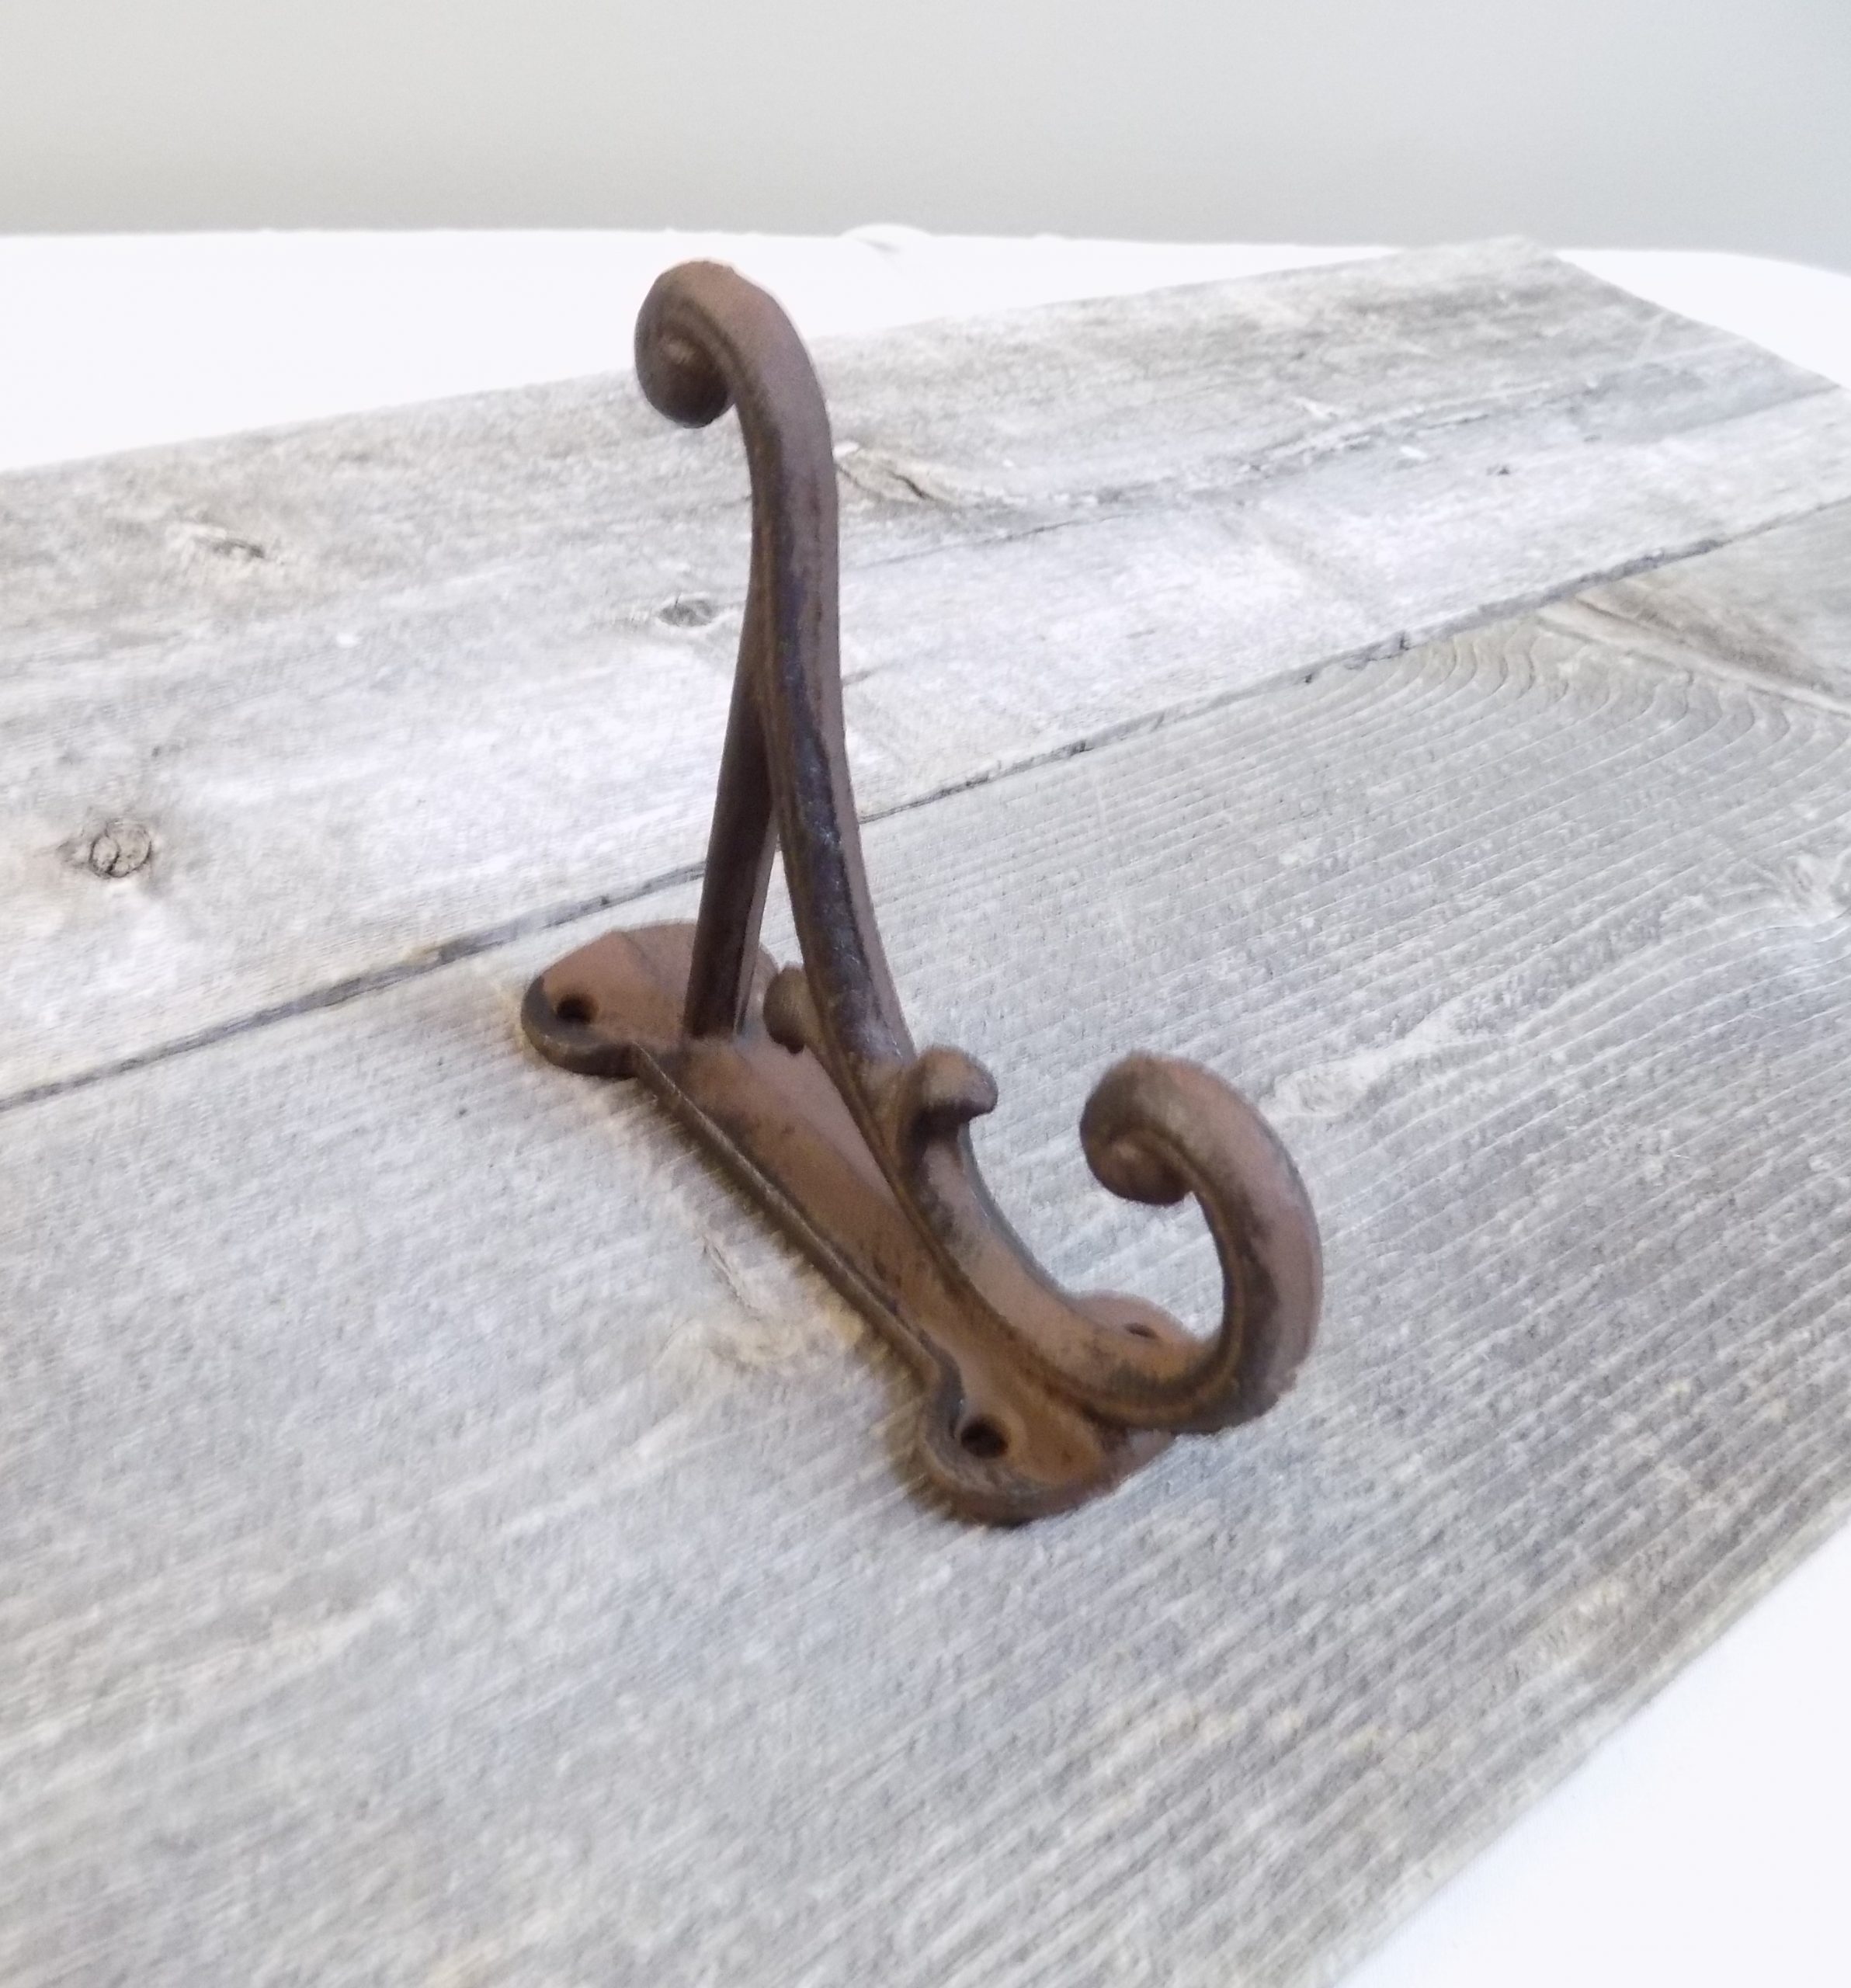 8 BROWN RUSTIC DOUBLE VINE COAT HOOKS ANTIQUE-STYLE CAST IRON 4.5" wall hardware 